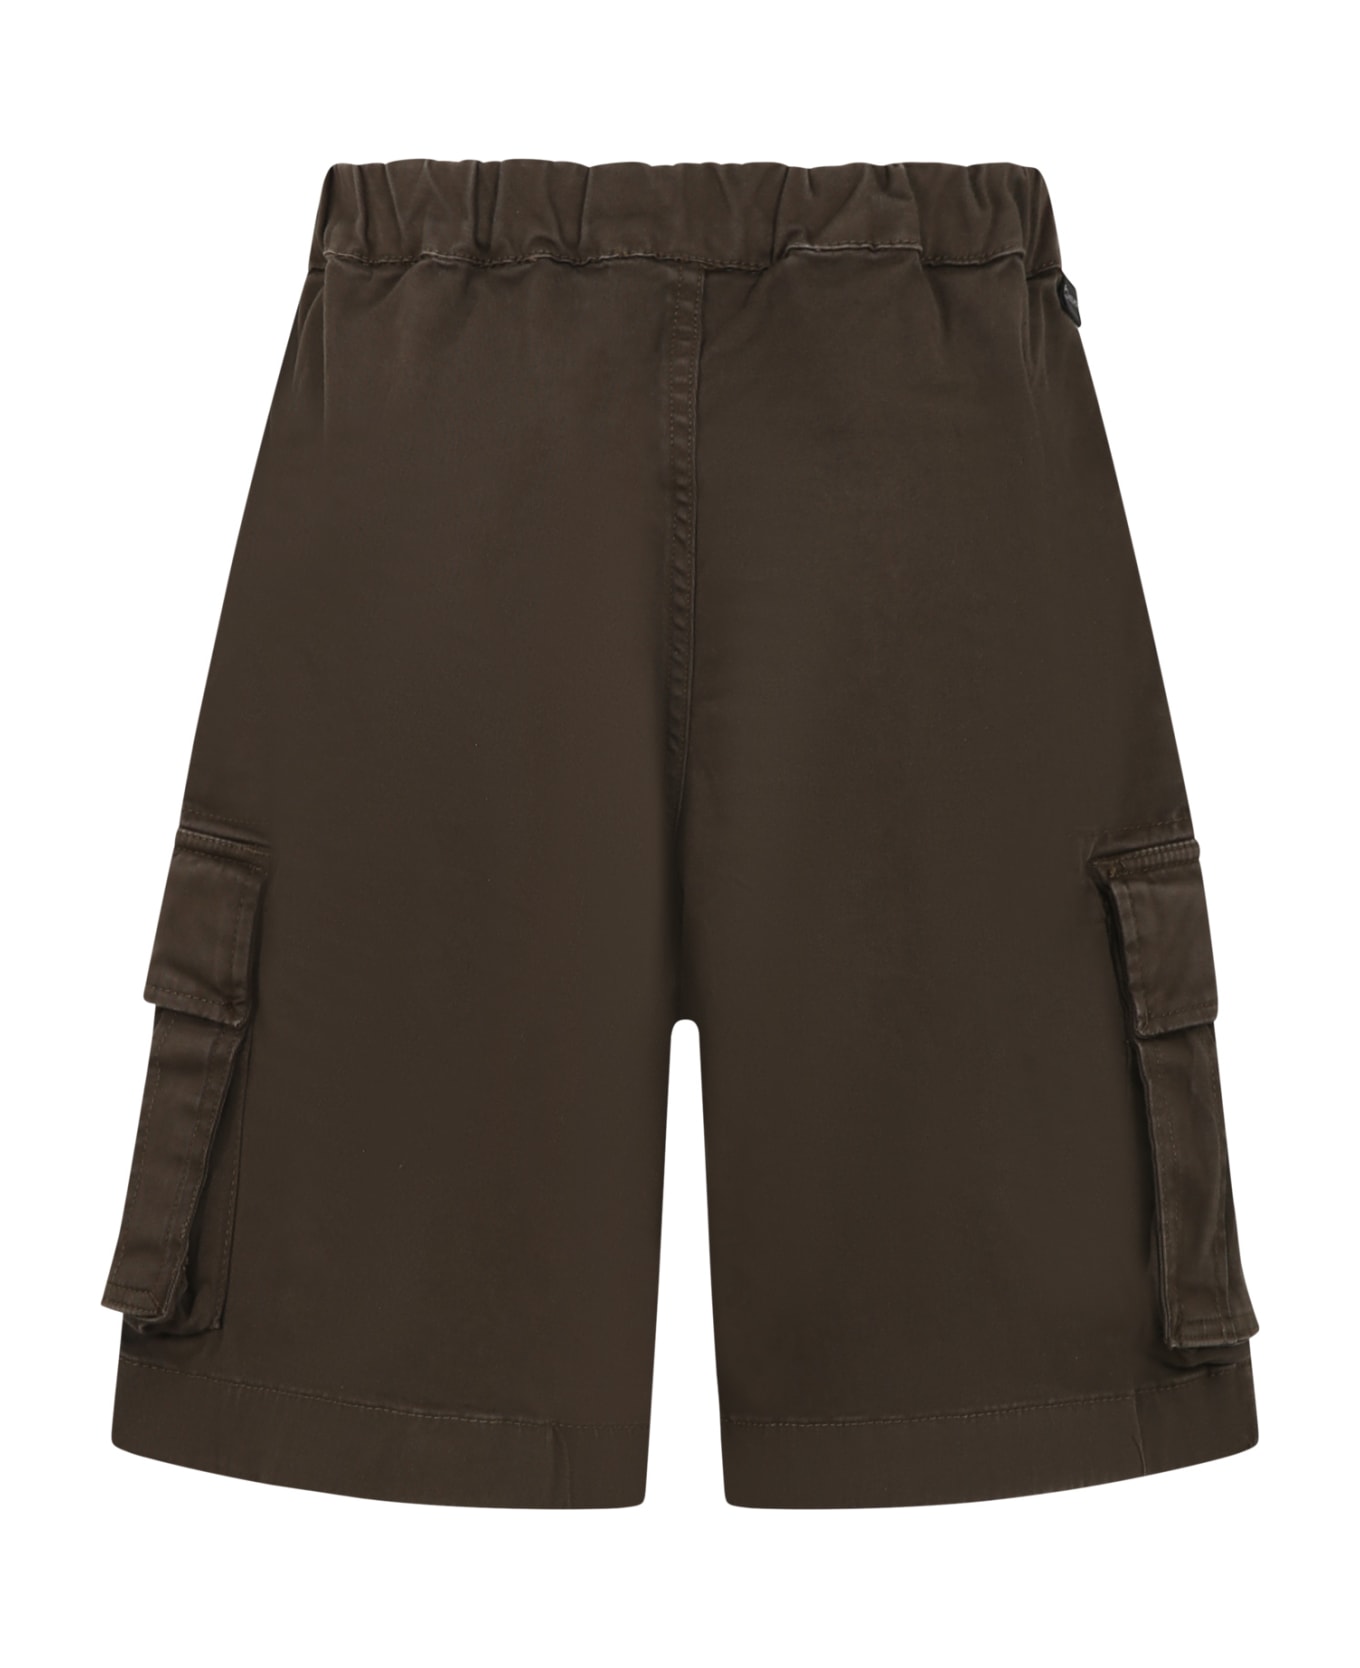 Woolrich Green Shorts For Boy - Green ボトムス